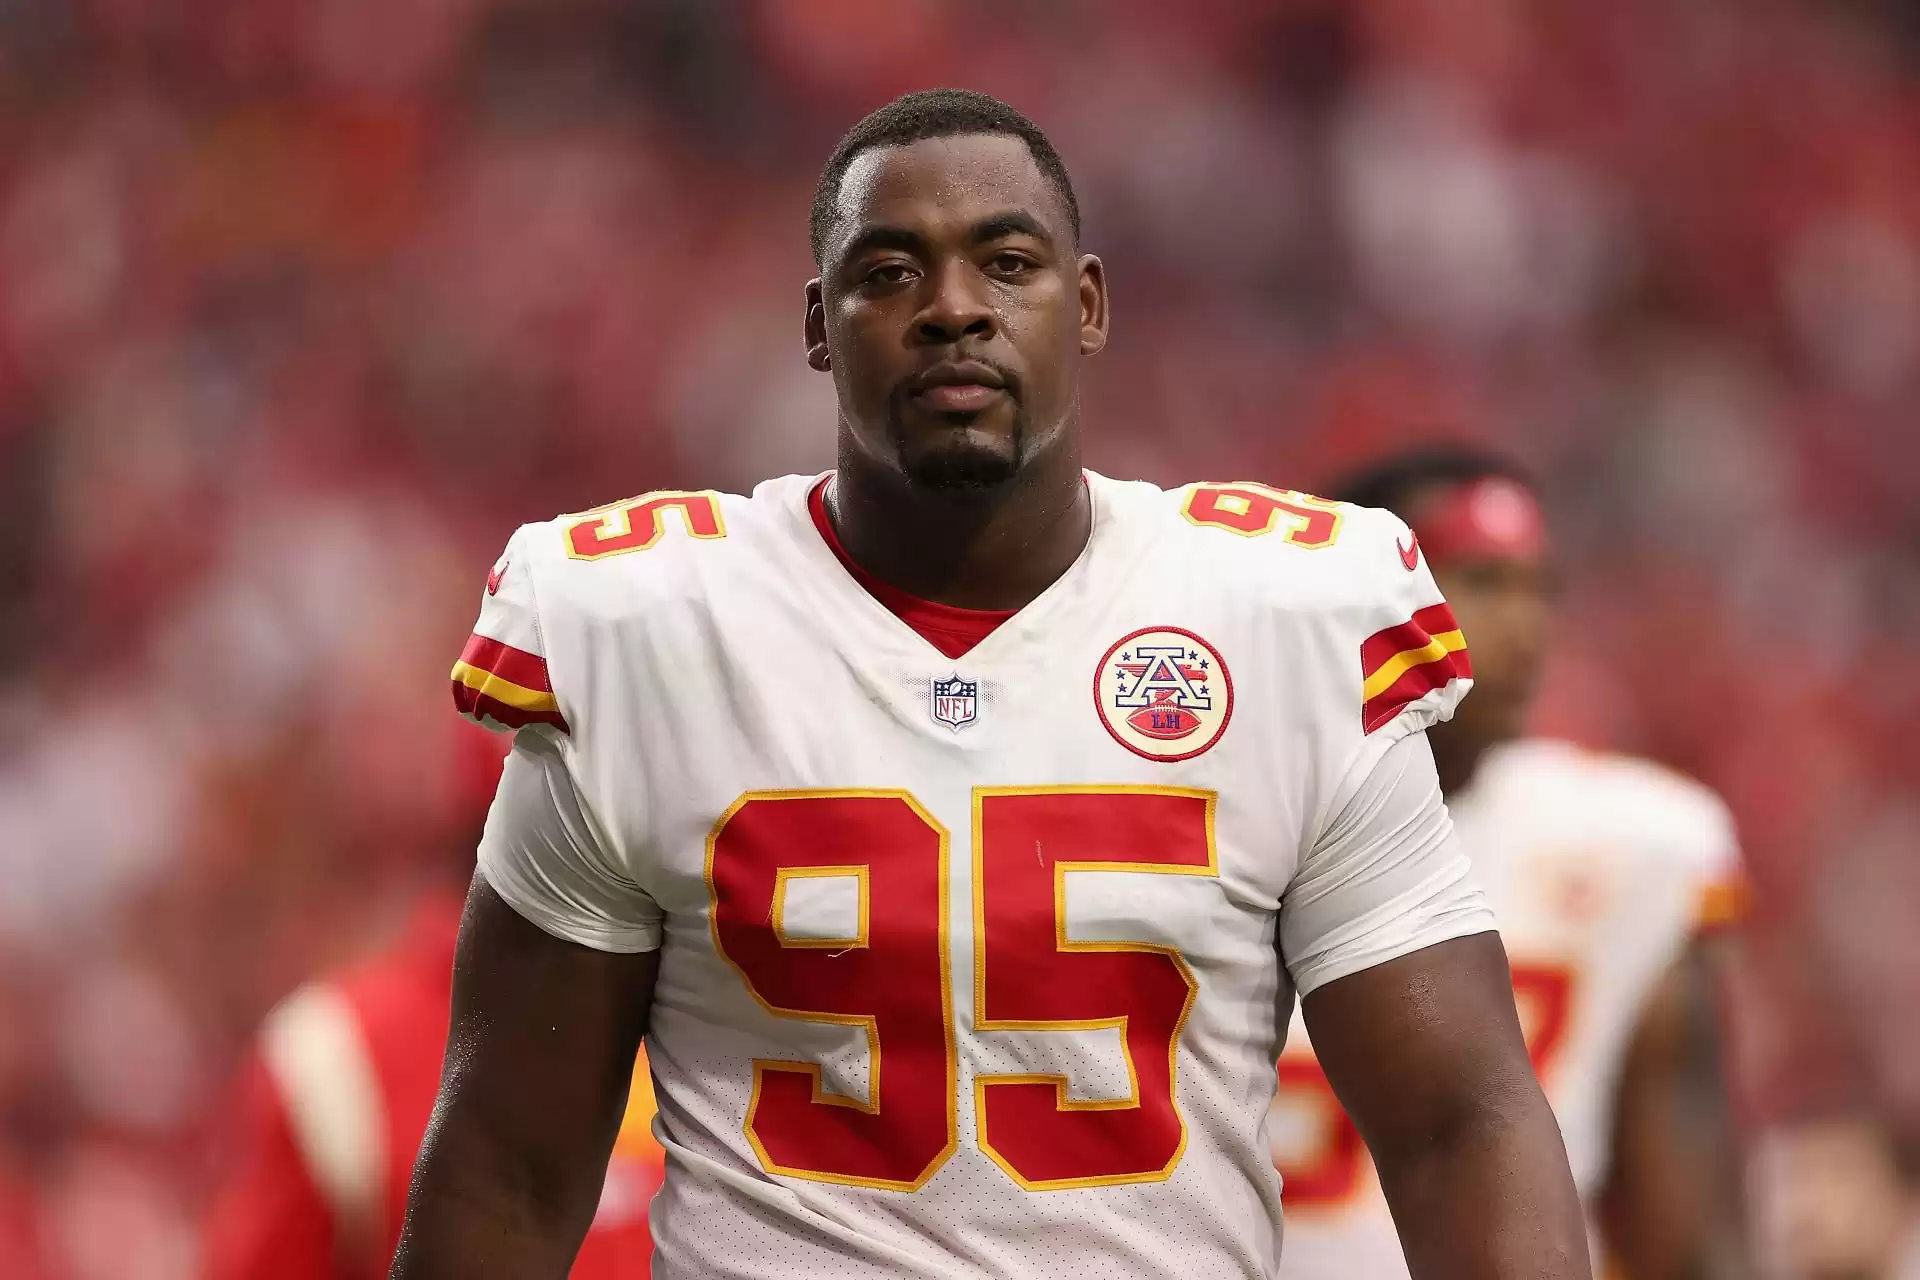 "Took the L and got scared": Chris Jones contract compromise after Chiefs' loss to Lions leaves fans trolling Super Bowl champs